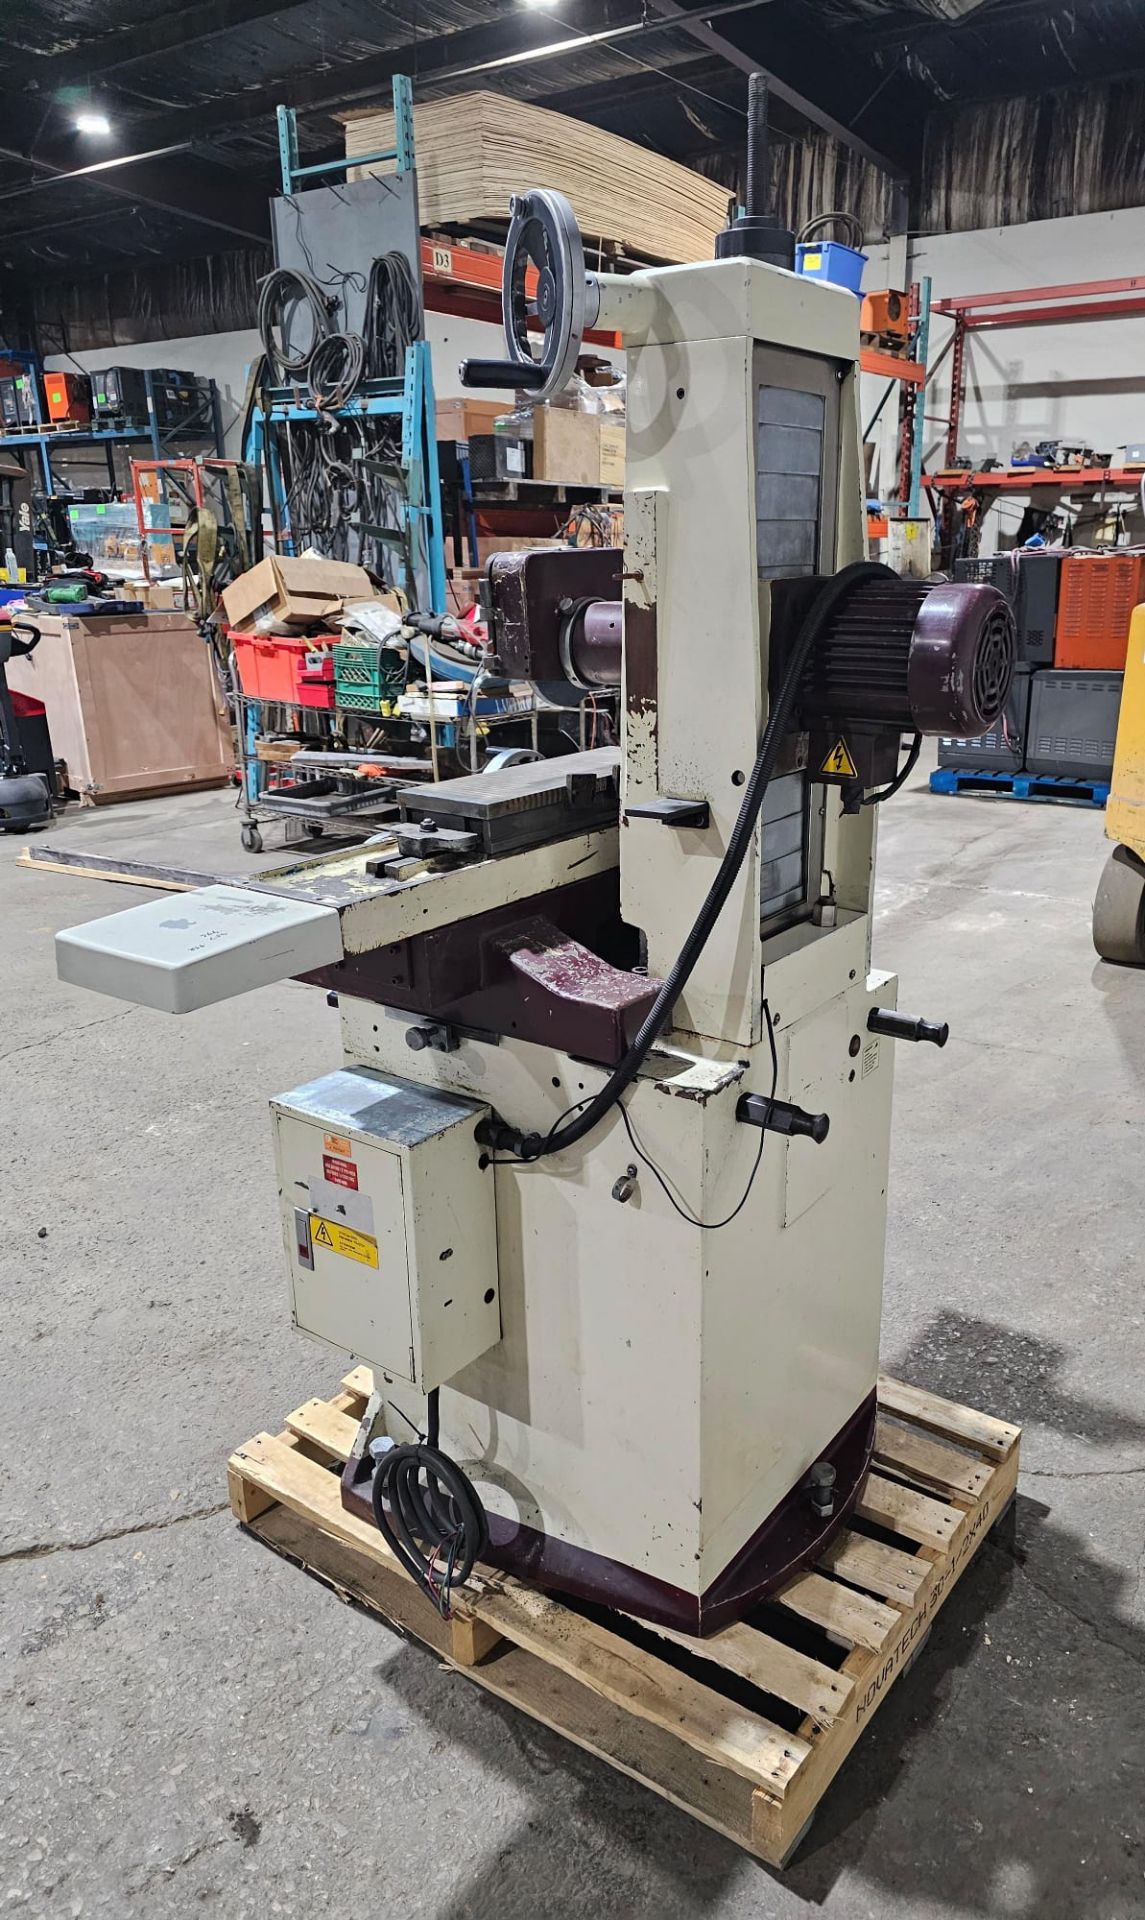 CHEVALIER Hydraulic Surface Grinder 18" x 6" Magnetic Chuck model: FSG-618M 575v 3 phase - Image 2 of 7